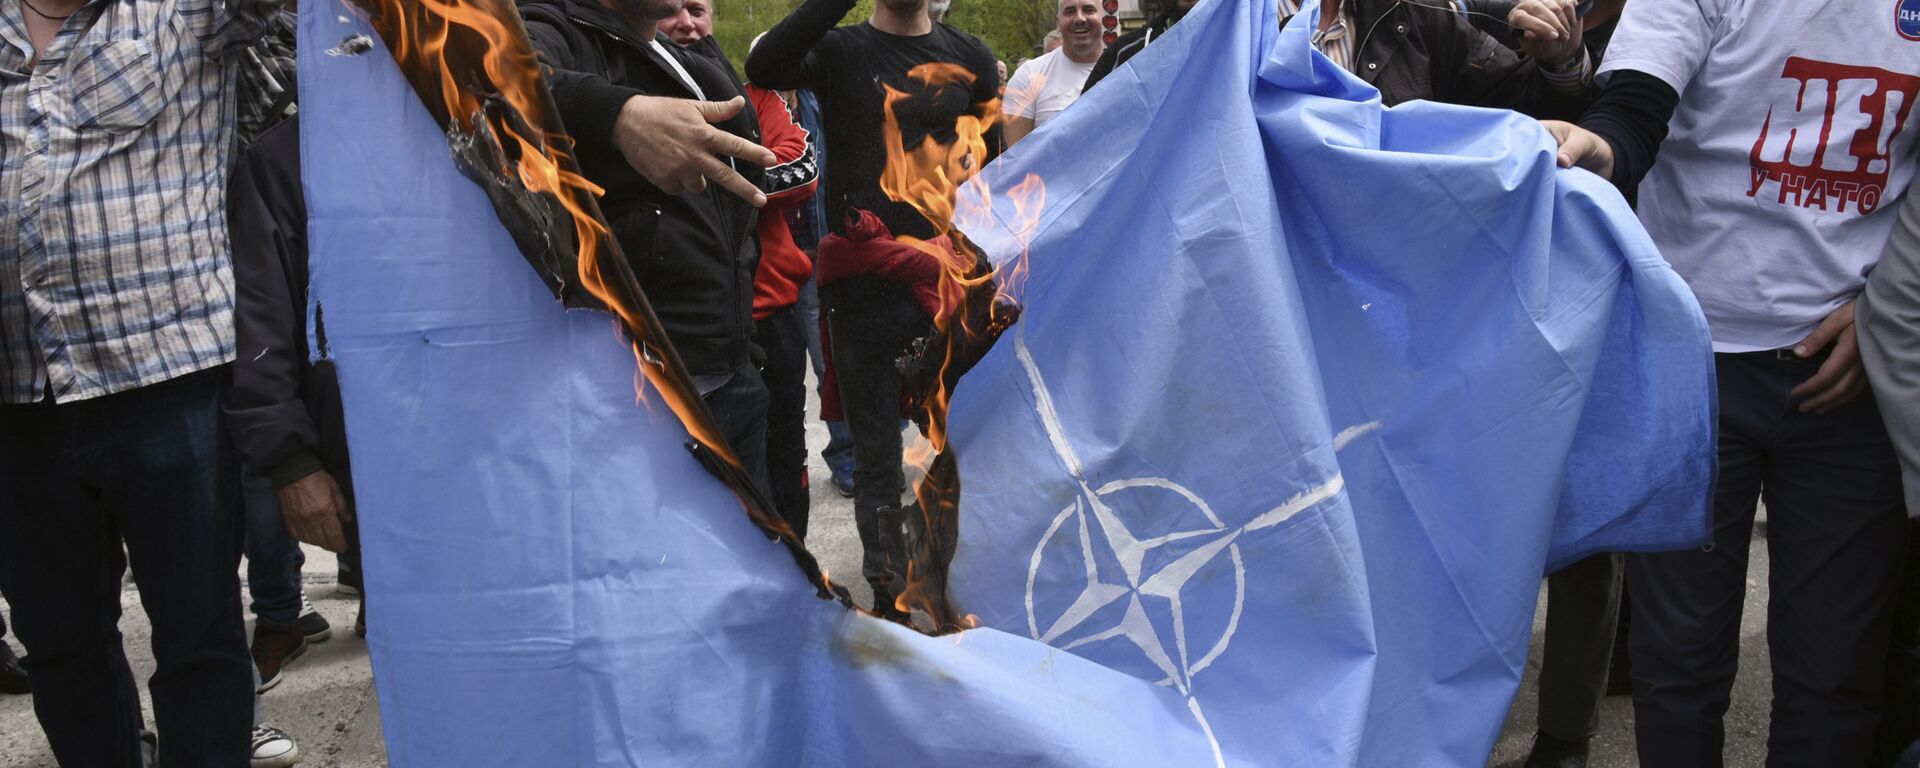 Anti-NATO demonstrators burn a NATO flag in front of a a banner that reads: No to NATO, your hands are bloody - Death to fascism, freedom to the people, during a protest outside the hall before the parliament session in Cetinje, Montenegro, Friday, April 28, 2017 - Sputnik International, 1920, 04.06.2017